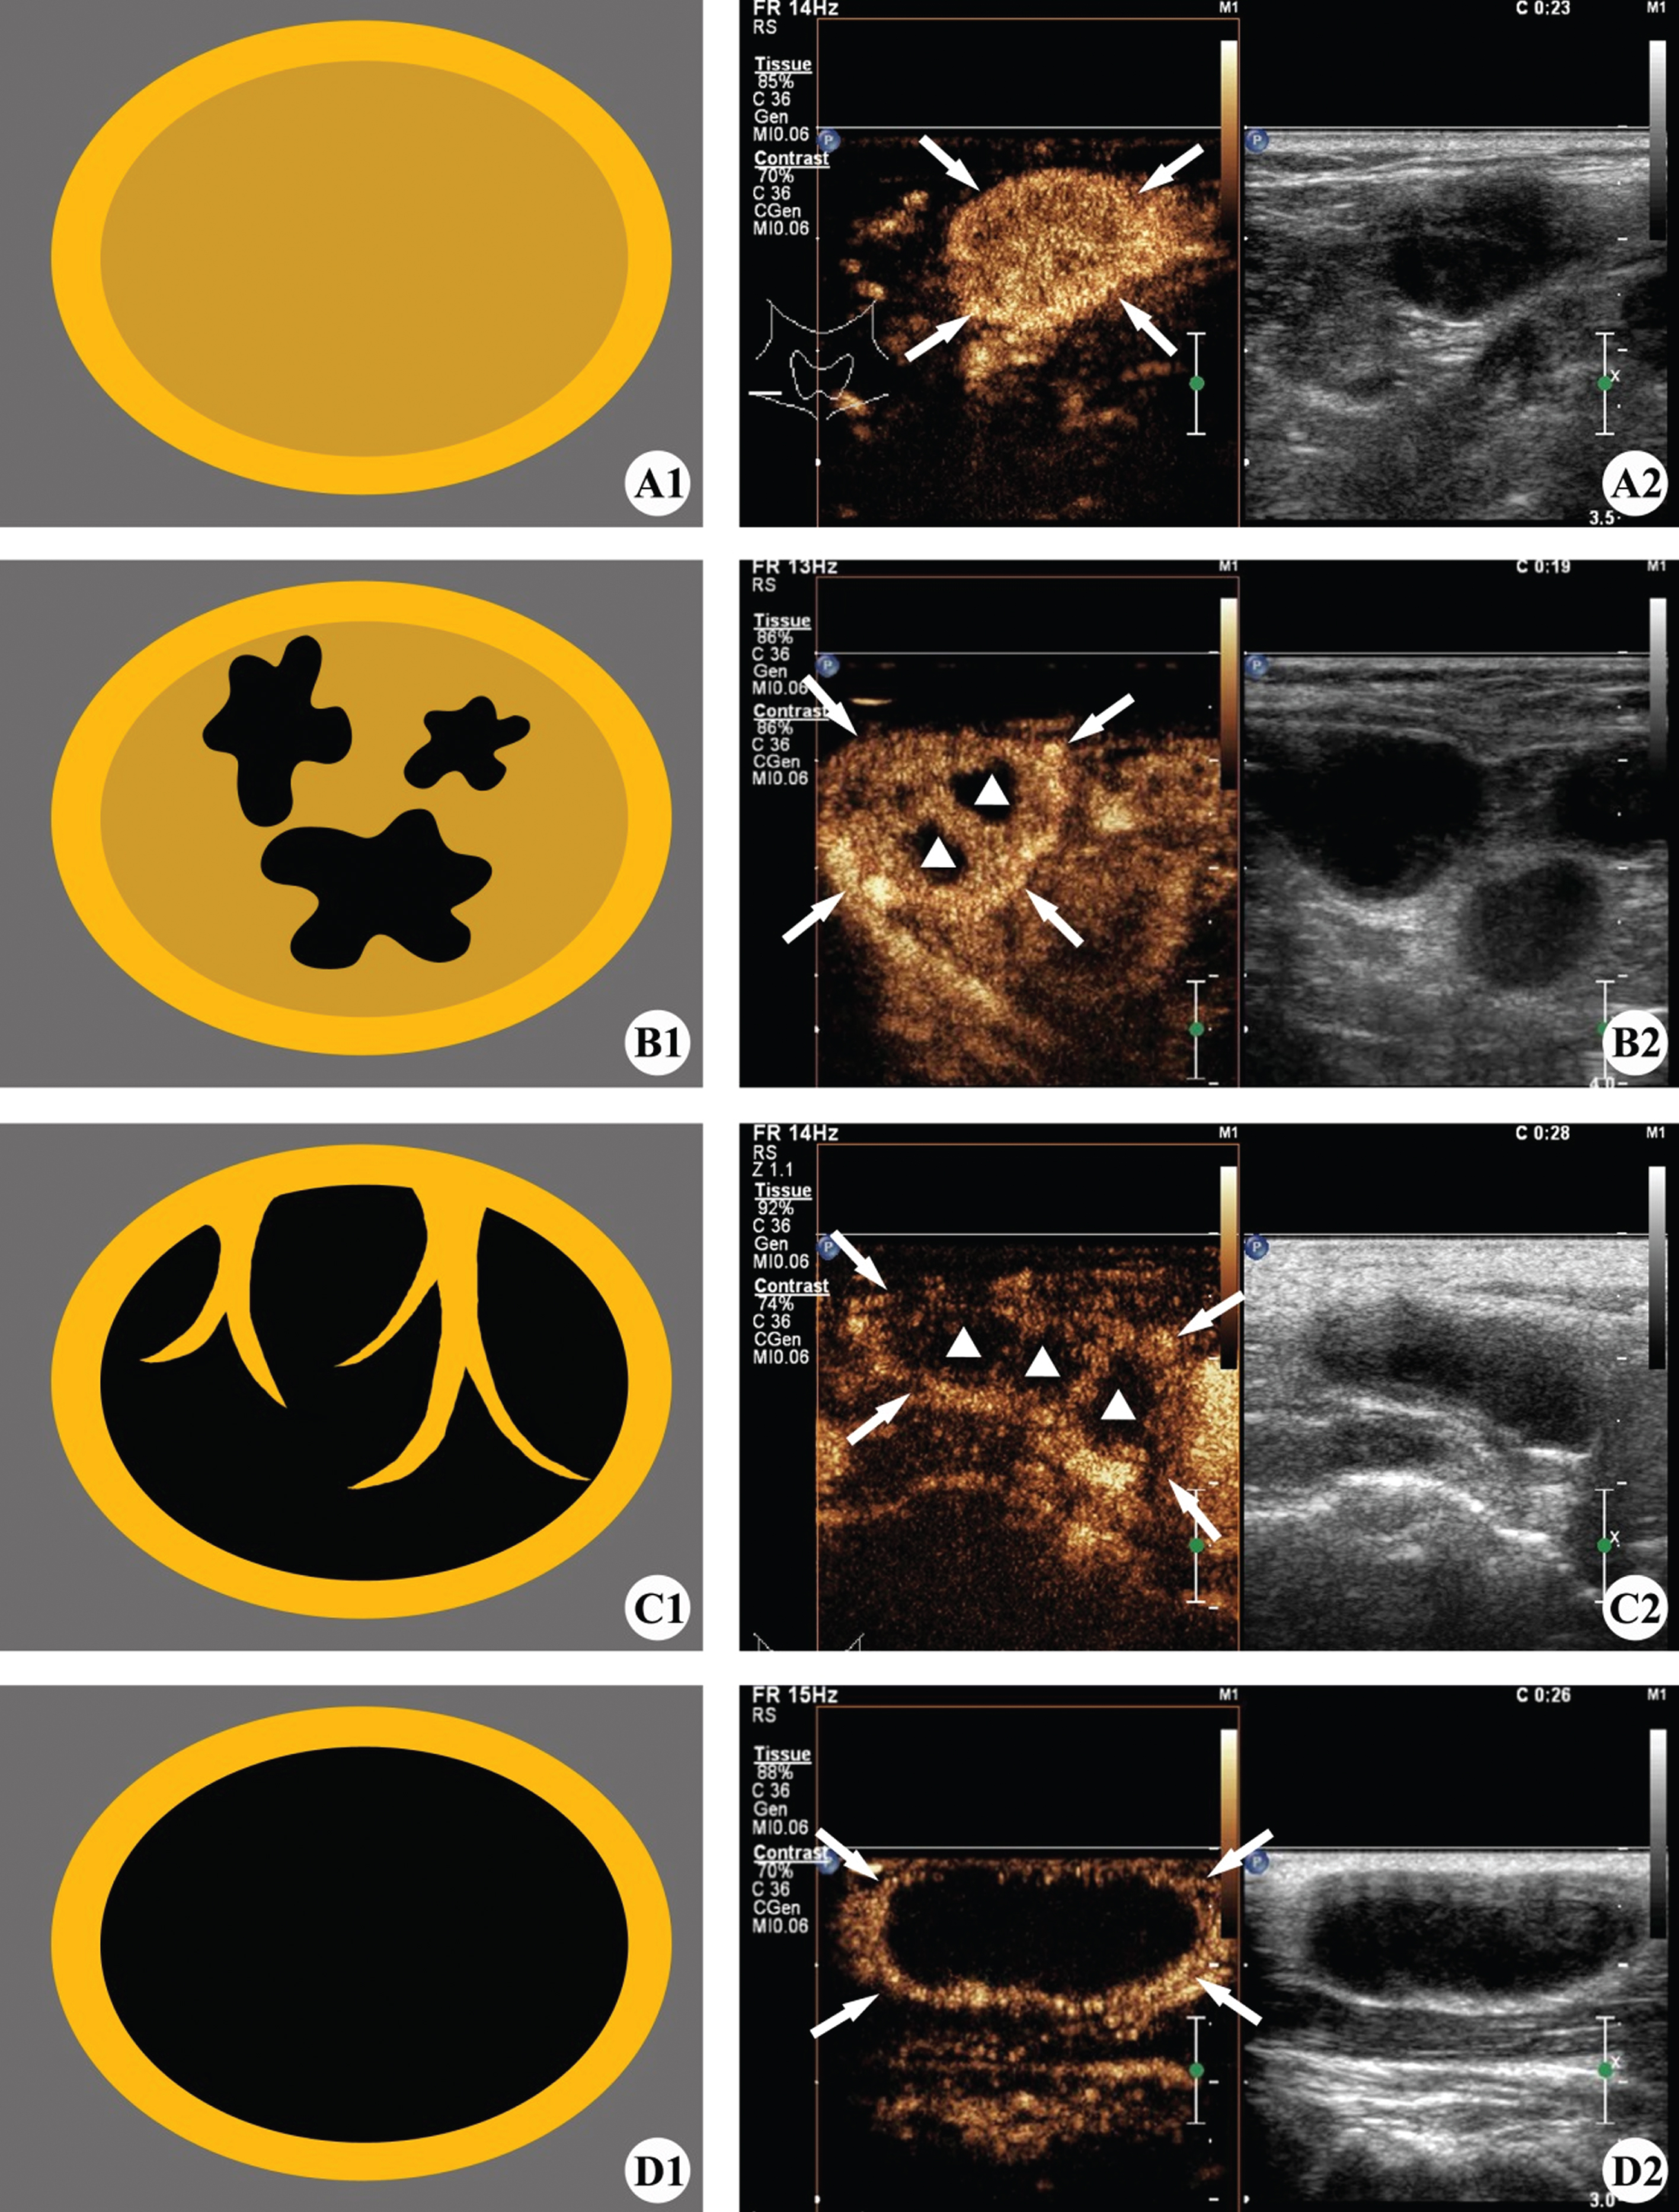 Images present general appearance of CTL for CEUS imaging patterns. (A1, A2) Pattern 1: peripheral rim-like enhancement (⟶) with internal homogeneous enhancement. (B1, B2) Pattern 2: peripheral rim-like enhancement (⟶) and internal heterogeneous enhancement (▵), like “honeycomb”. (C1, C2) Pattern 2: peripheral rim-like enhancement (⟶) and internal heterogeneous enhancement (▵), like “dead wood”. (D1, D2) Pattern 3: peripheral rim-like enhancement (⟶) with non-enhancement inside the lesion.